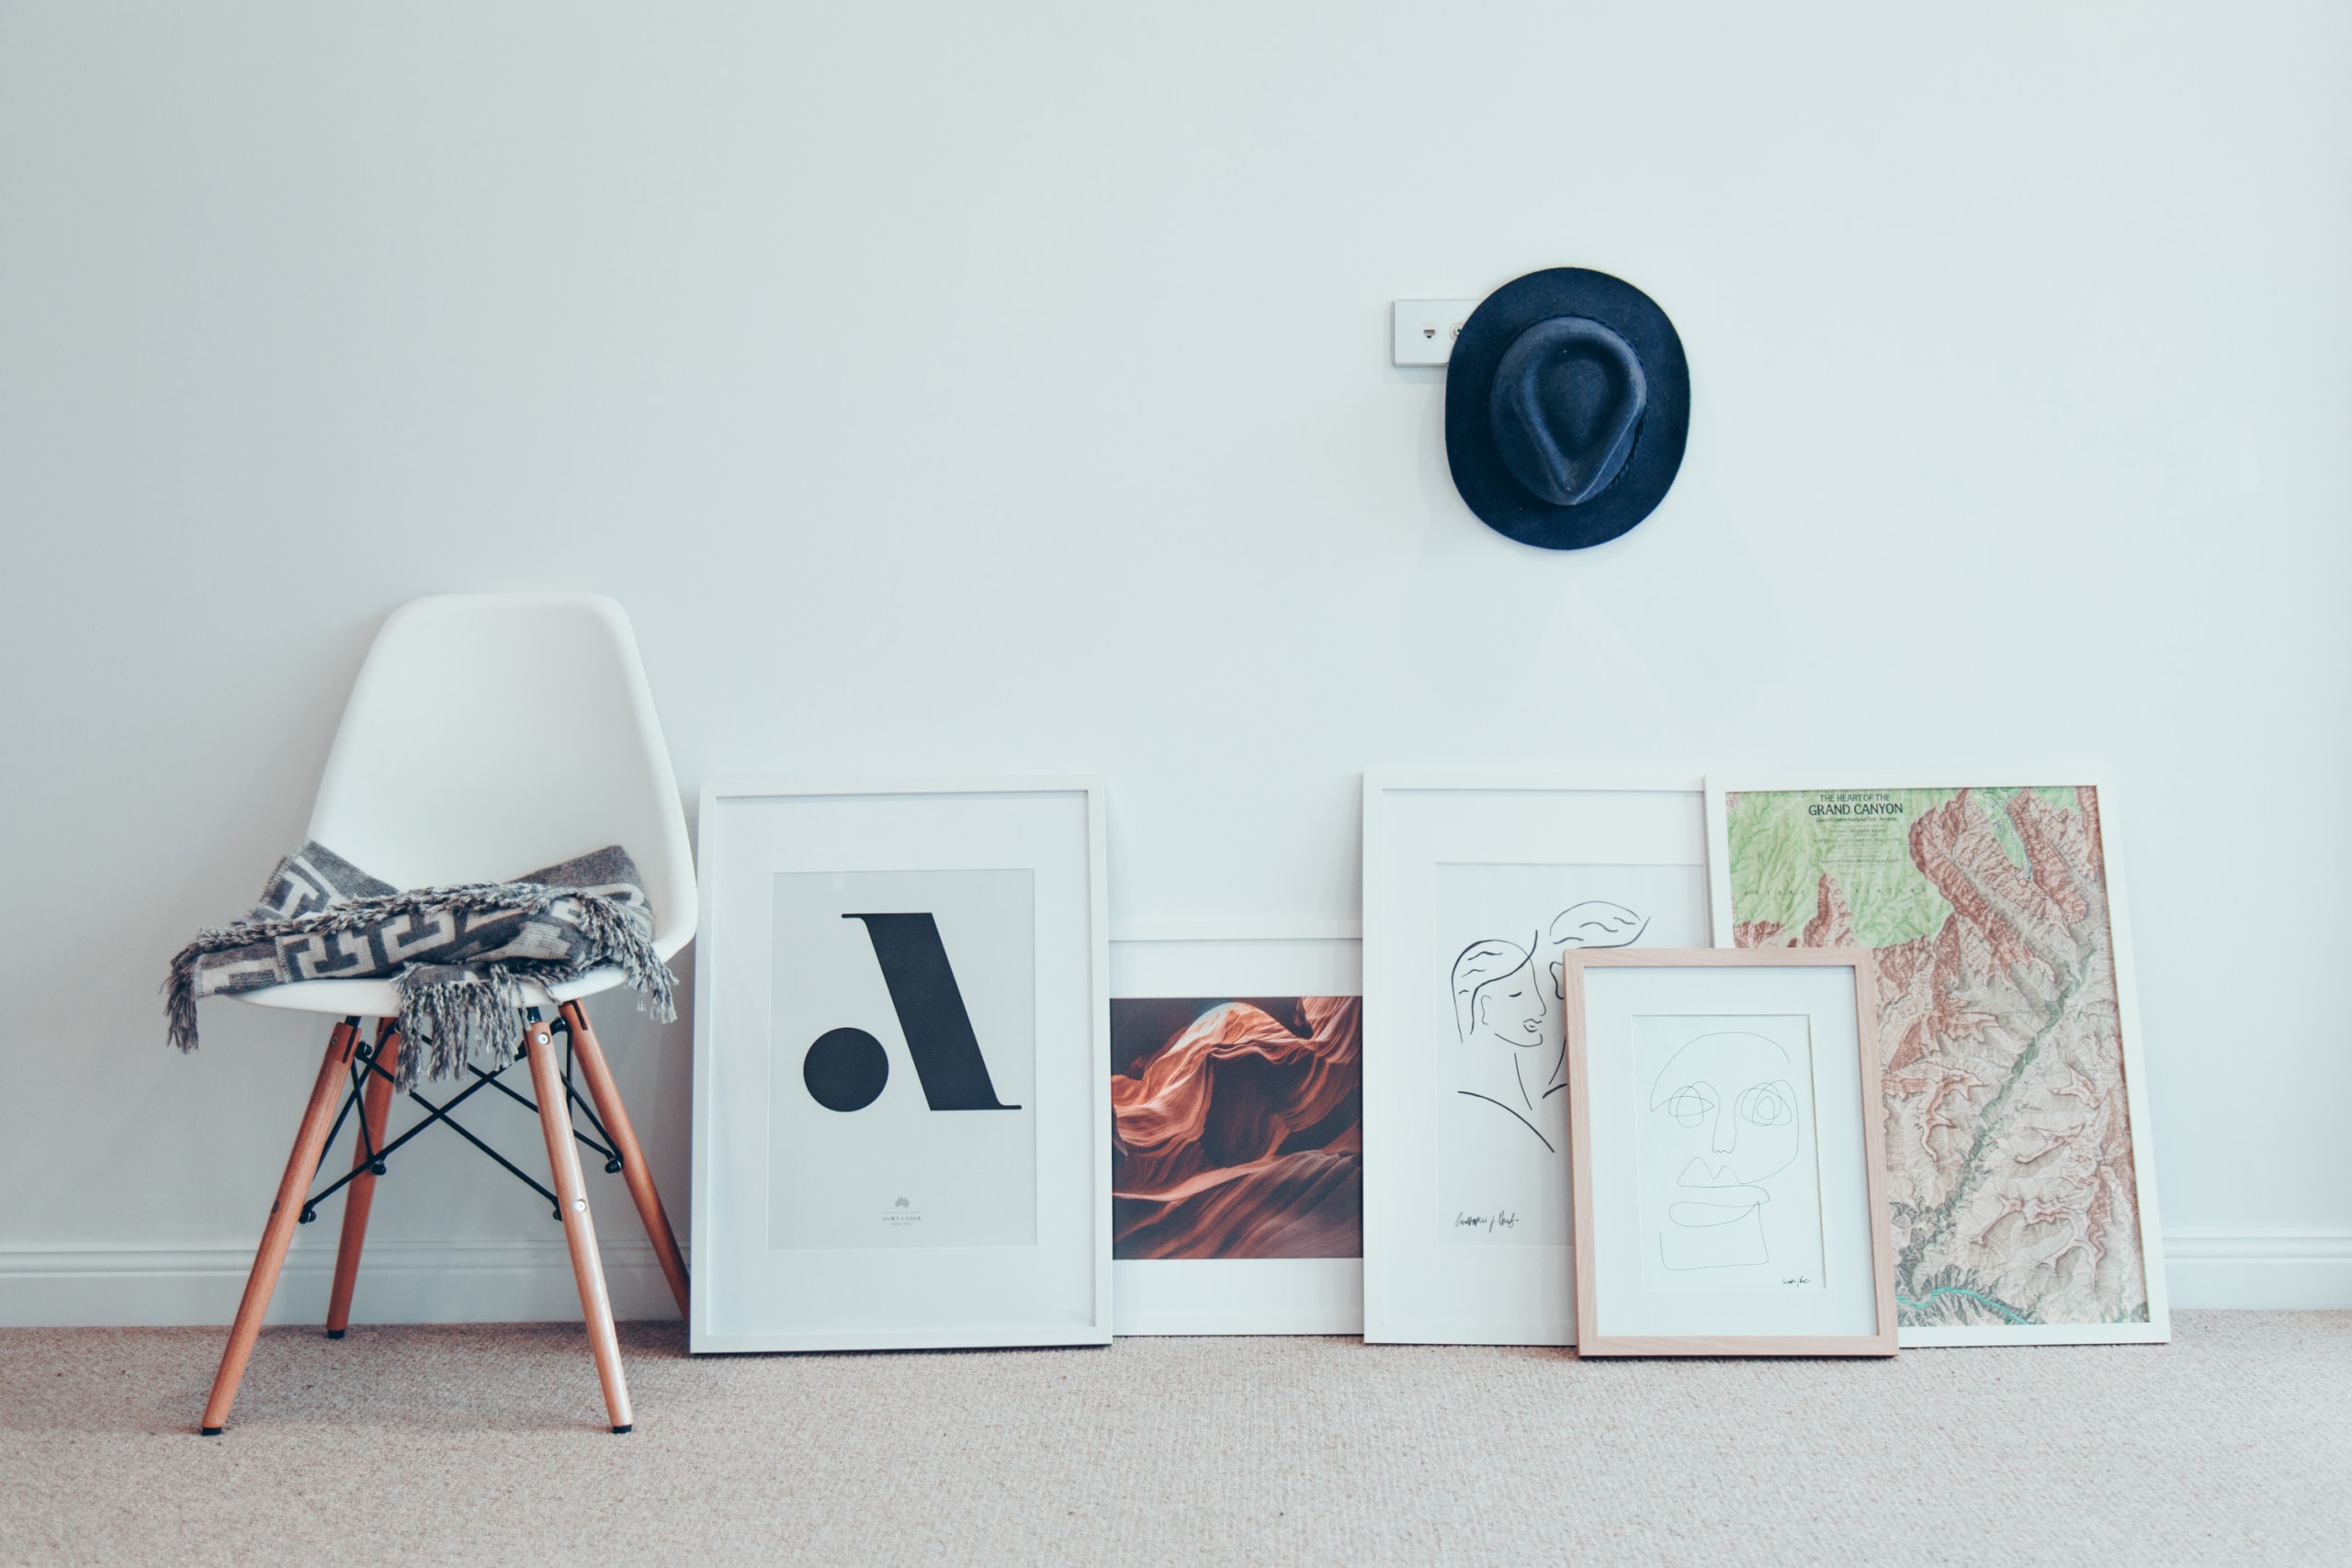 How to Hang Pictures Without Nails: 3 Easy Ways